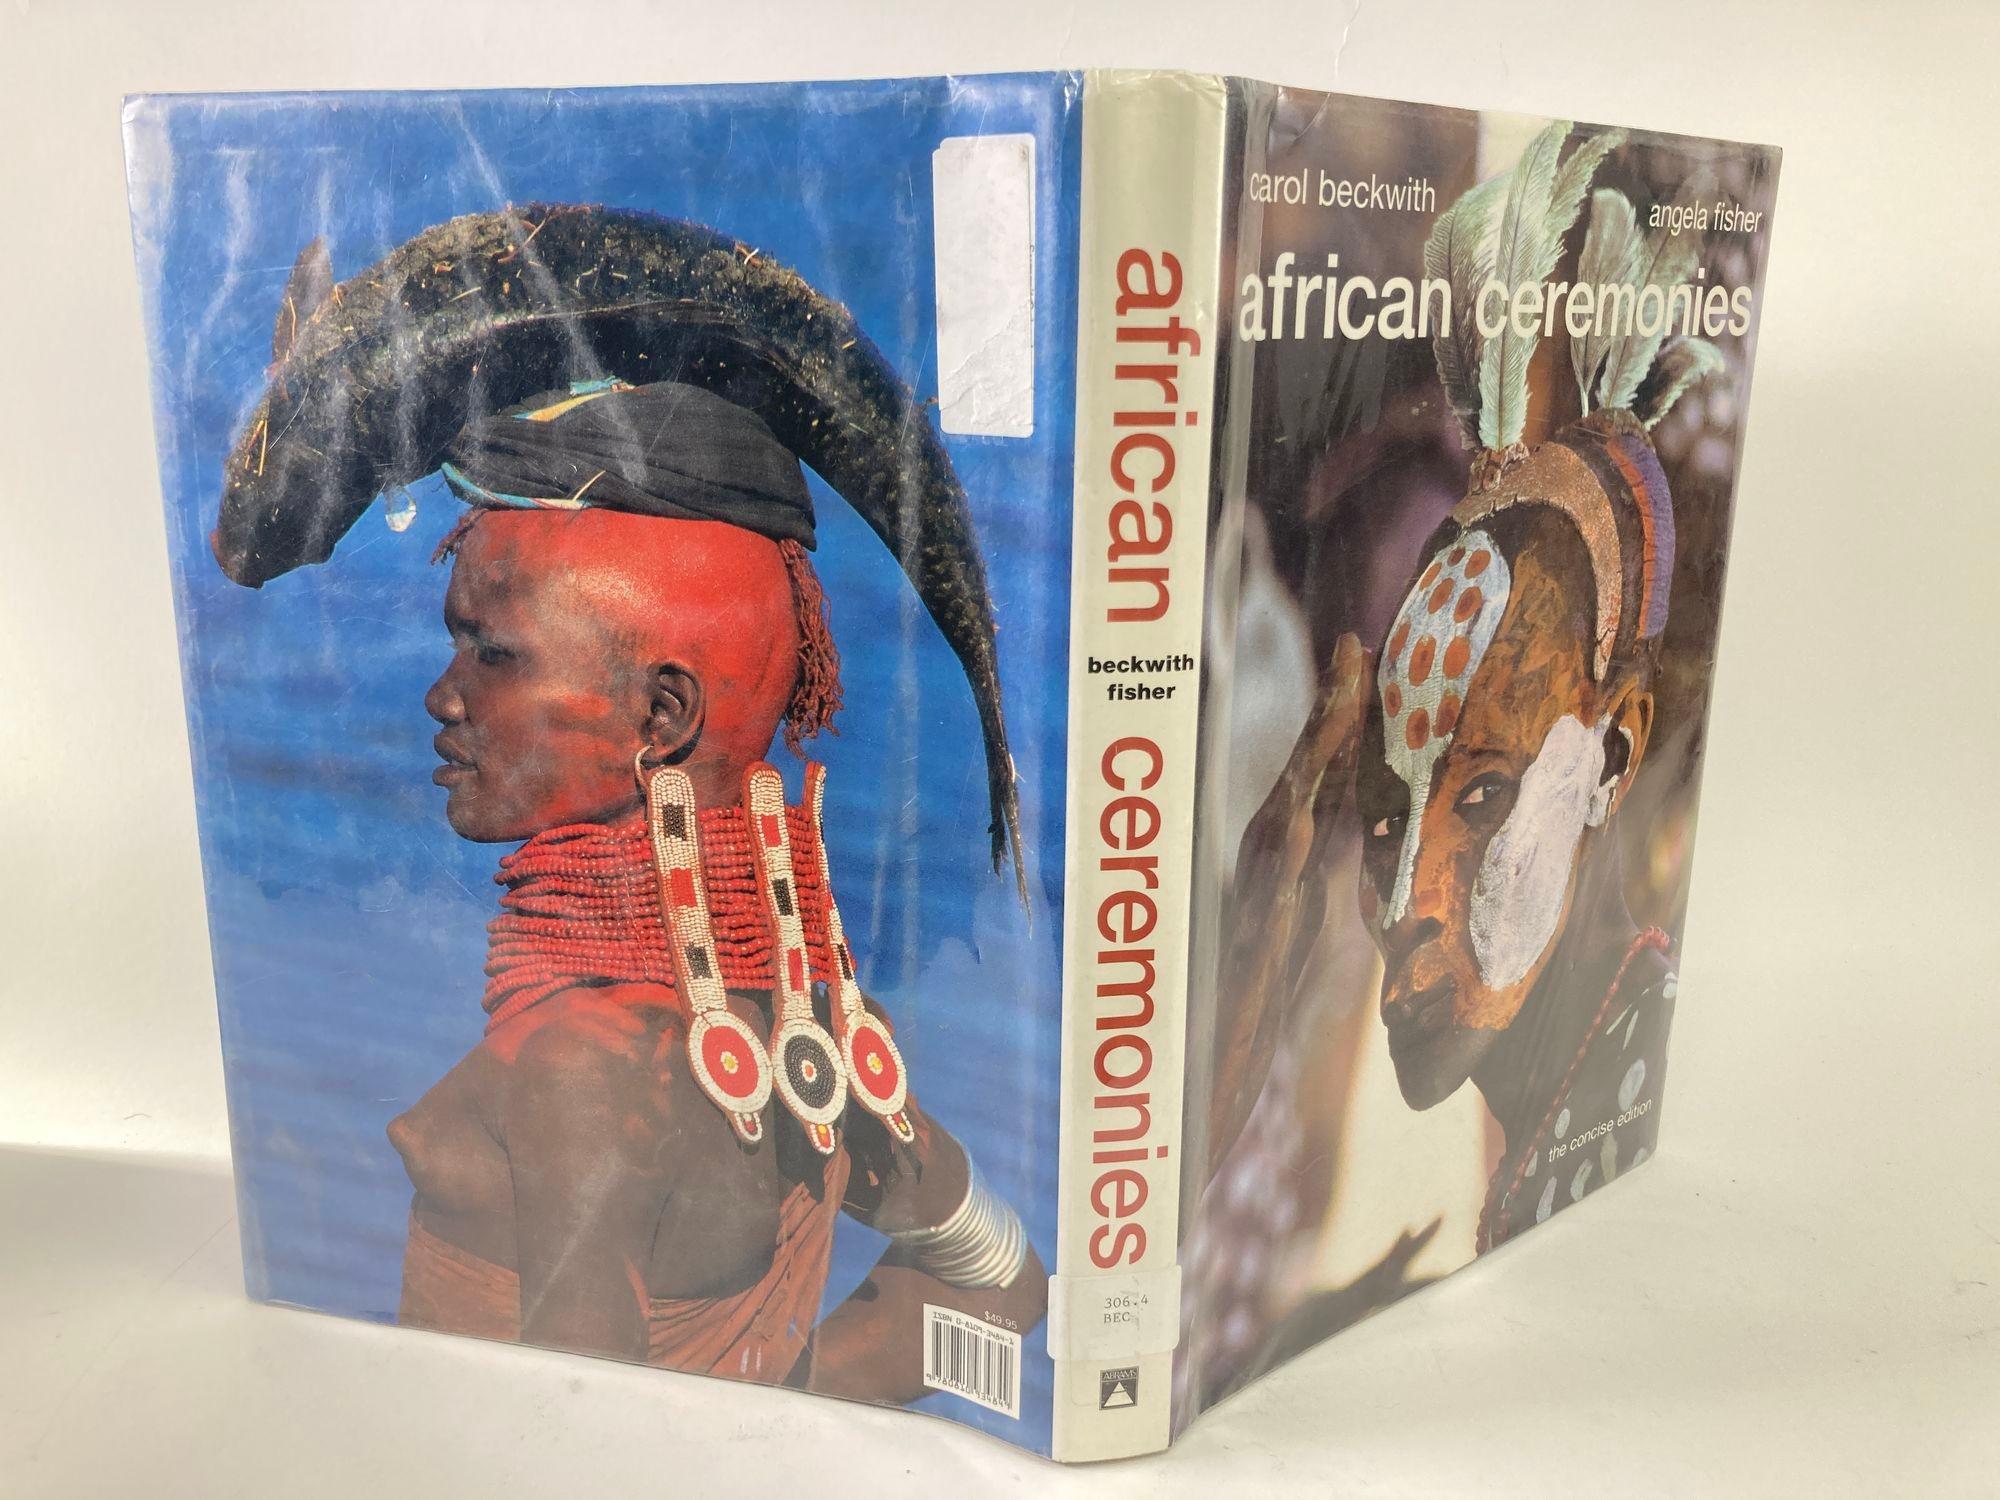 Tribal African Ceremonies by Carol Beckwith and Angela Fisher Hardcover Book For Sale